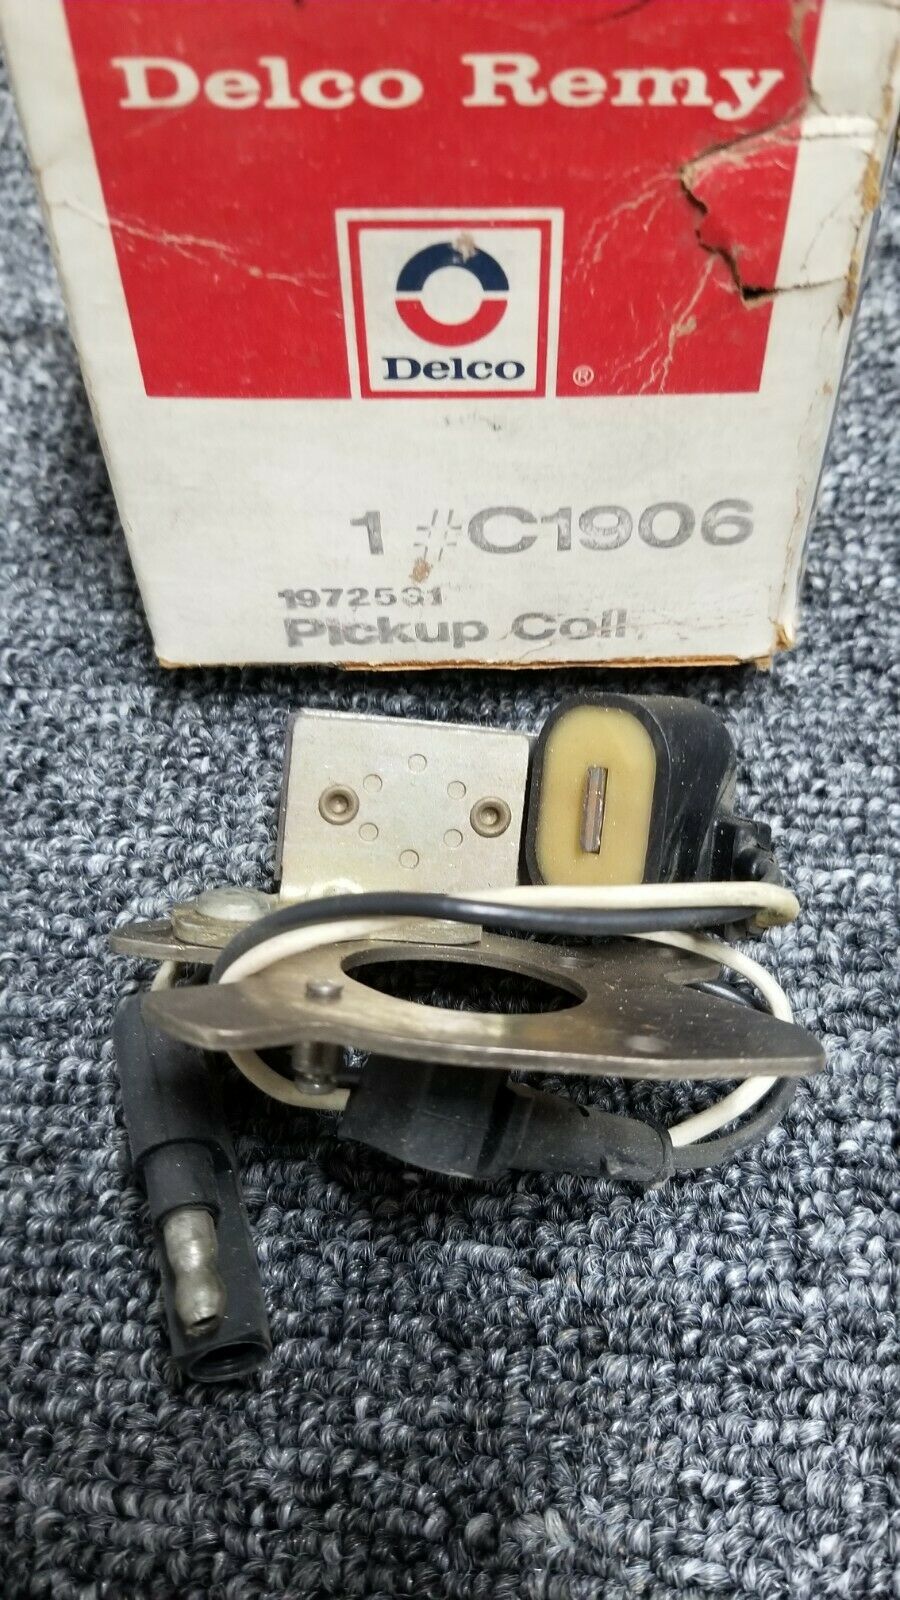 NEW OLD STOCK DELCO REMY C1906. PICKUP COIL. FREE SHIPPING   1972531 - $14.95